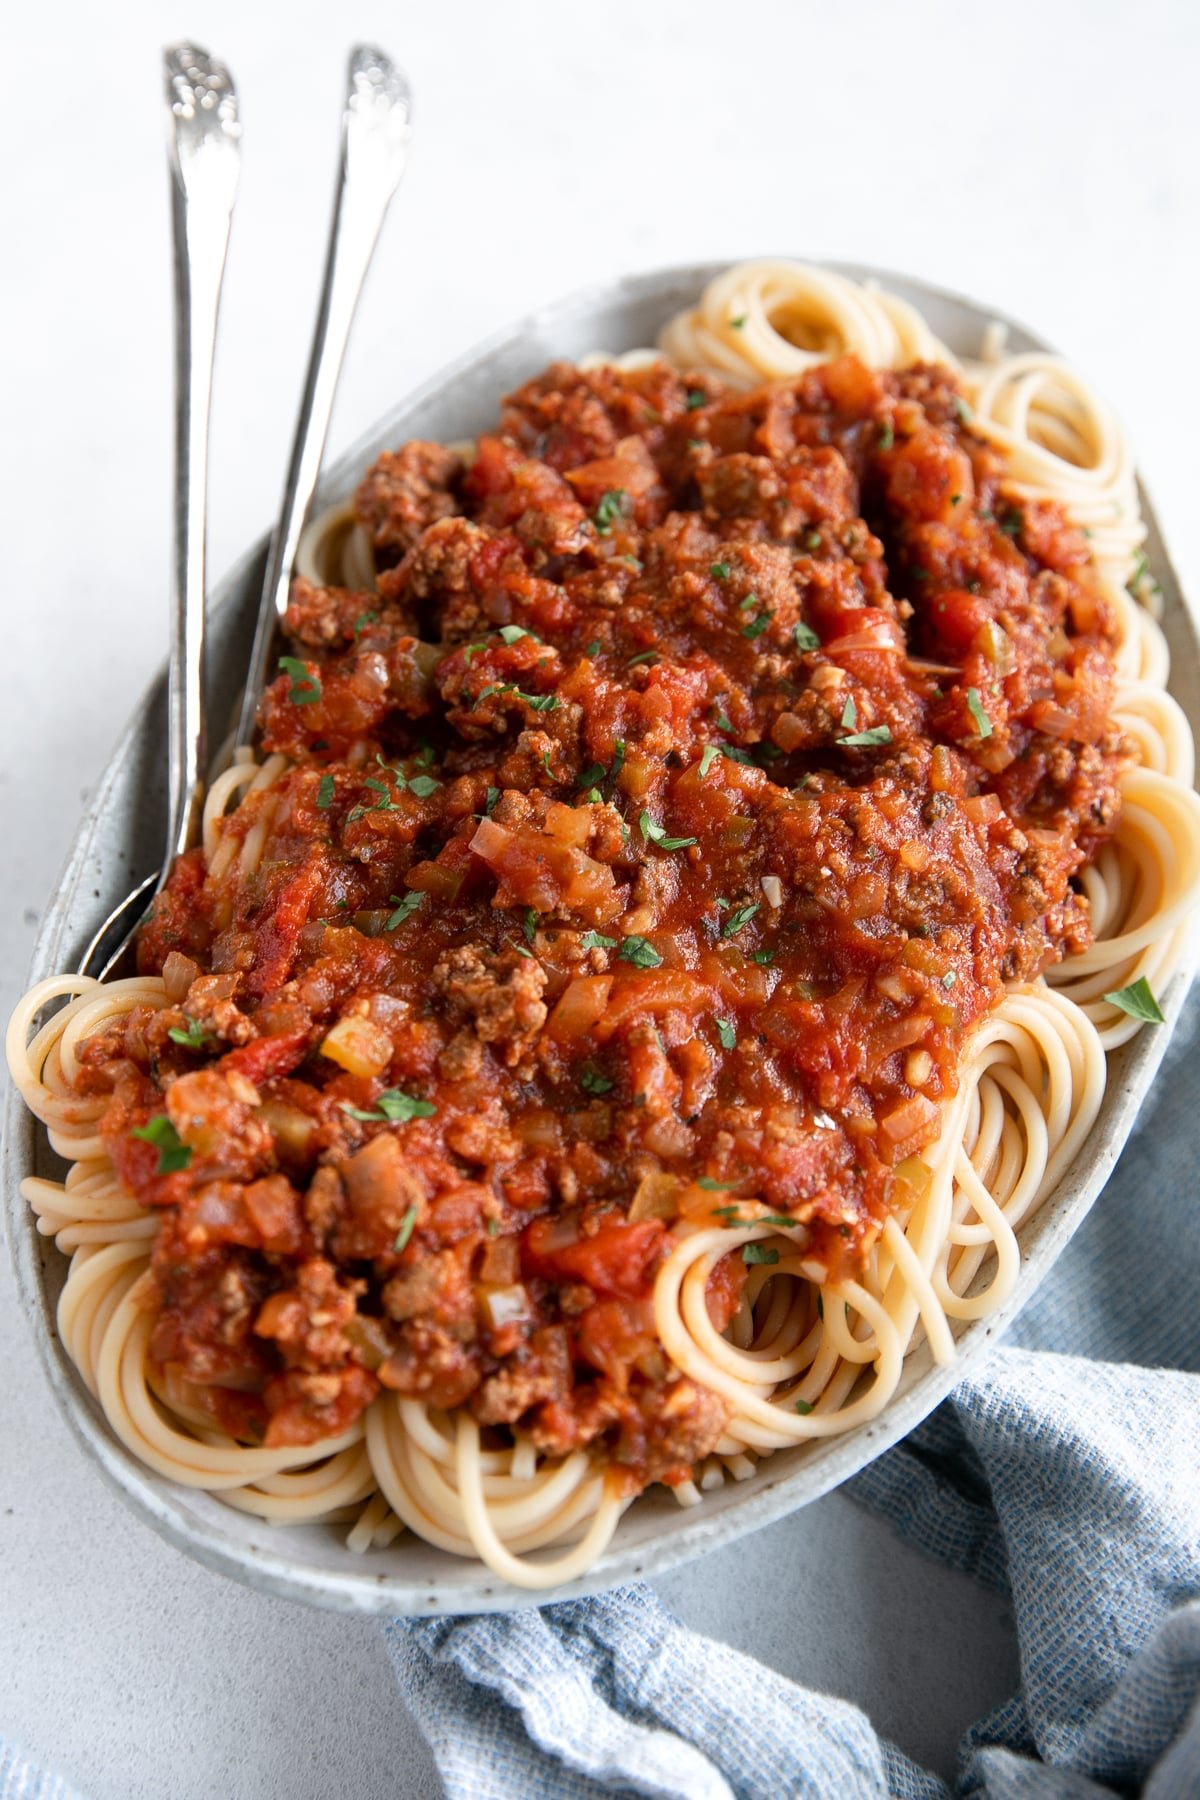 Large white serving plate filled with spaghetti noodles topped with homemade spaghetti sauce recipe.